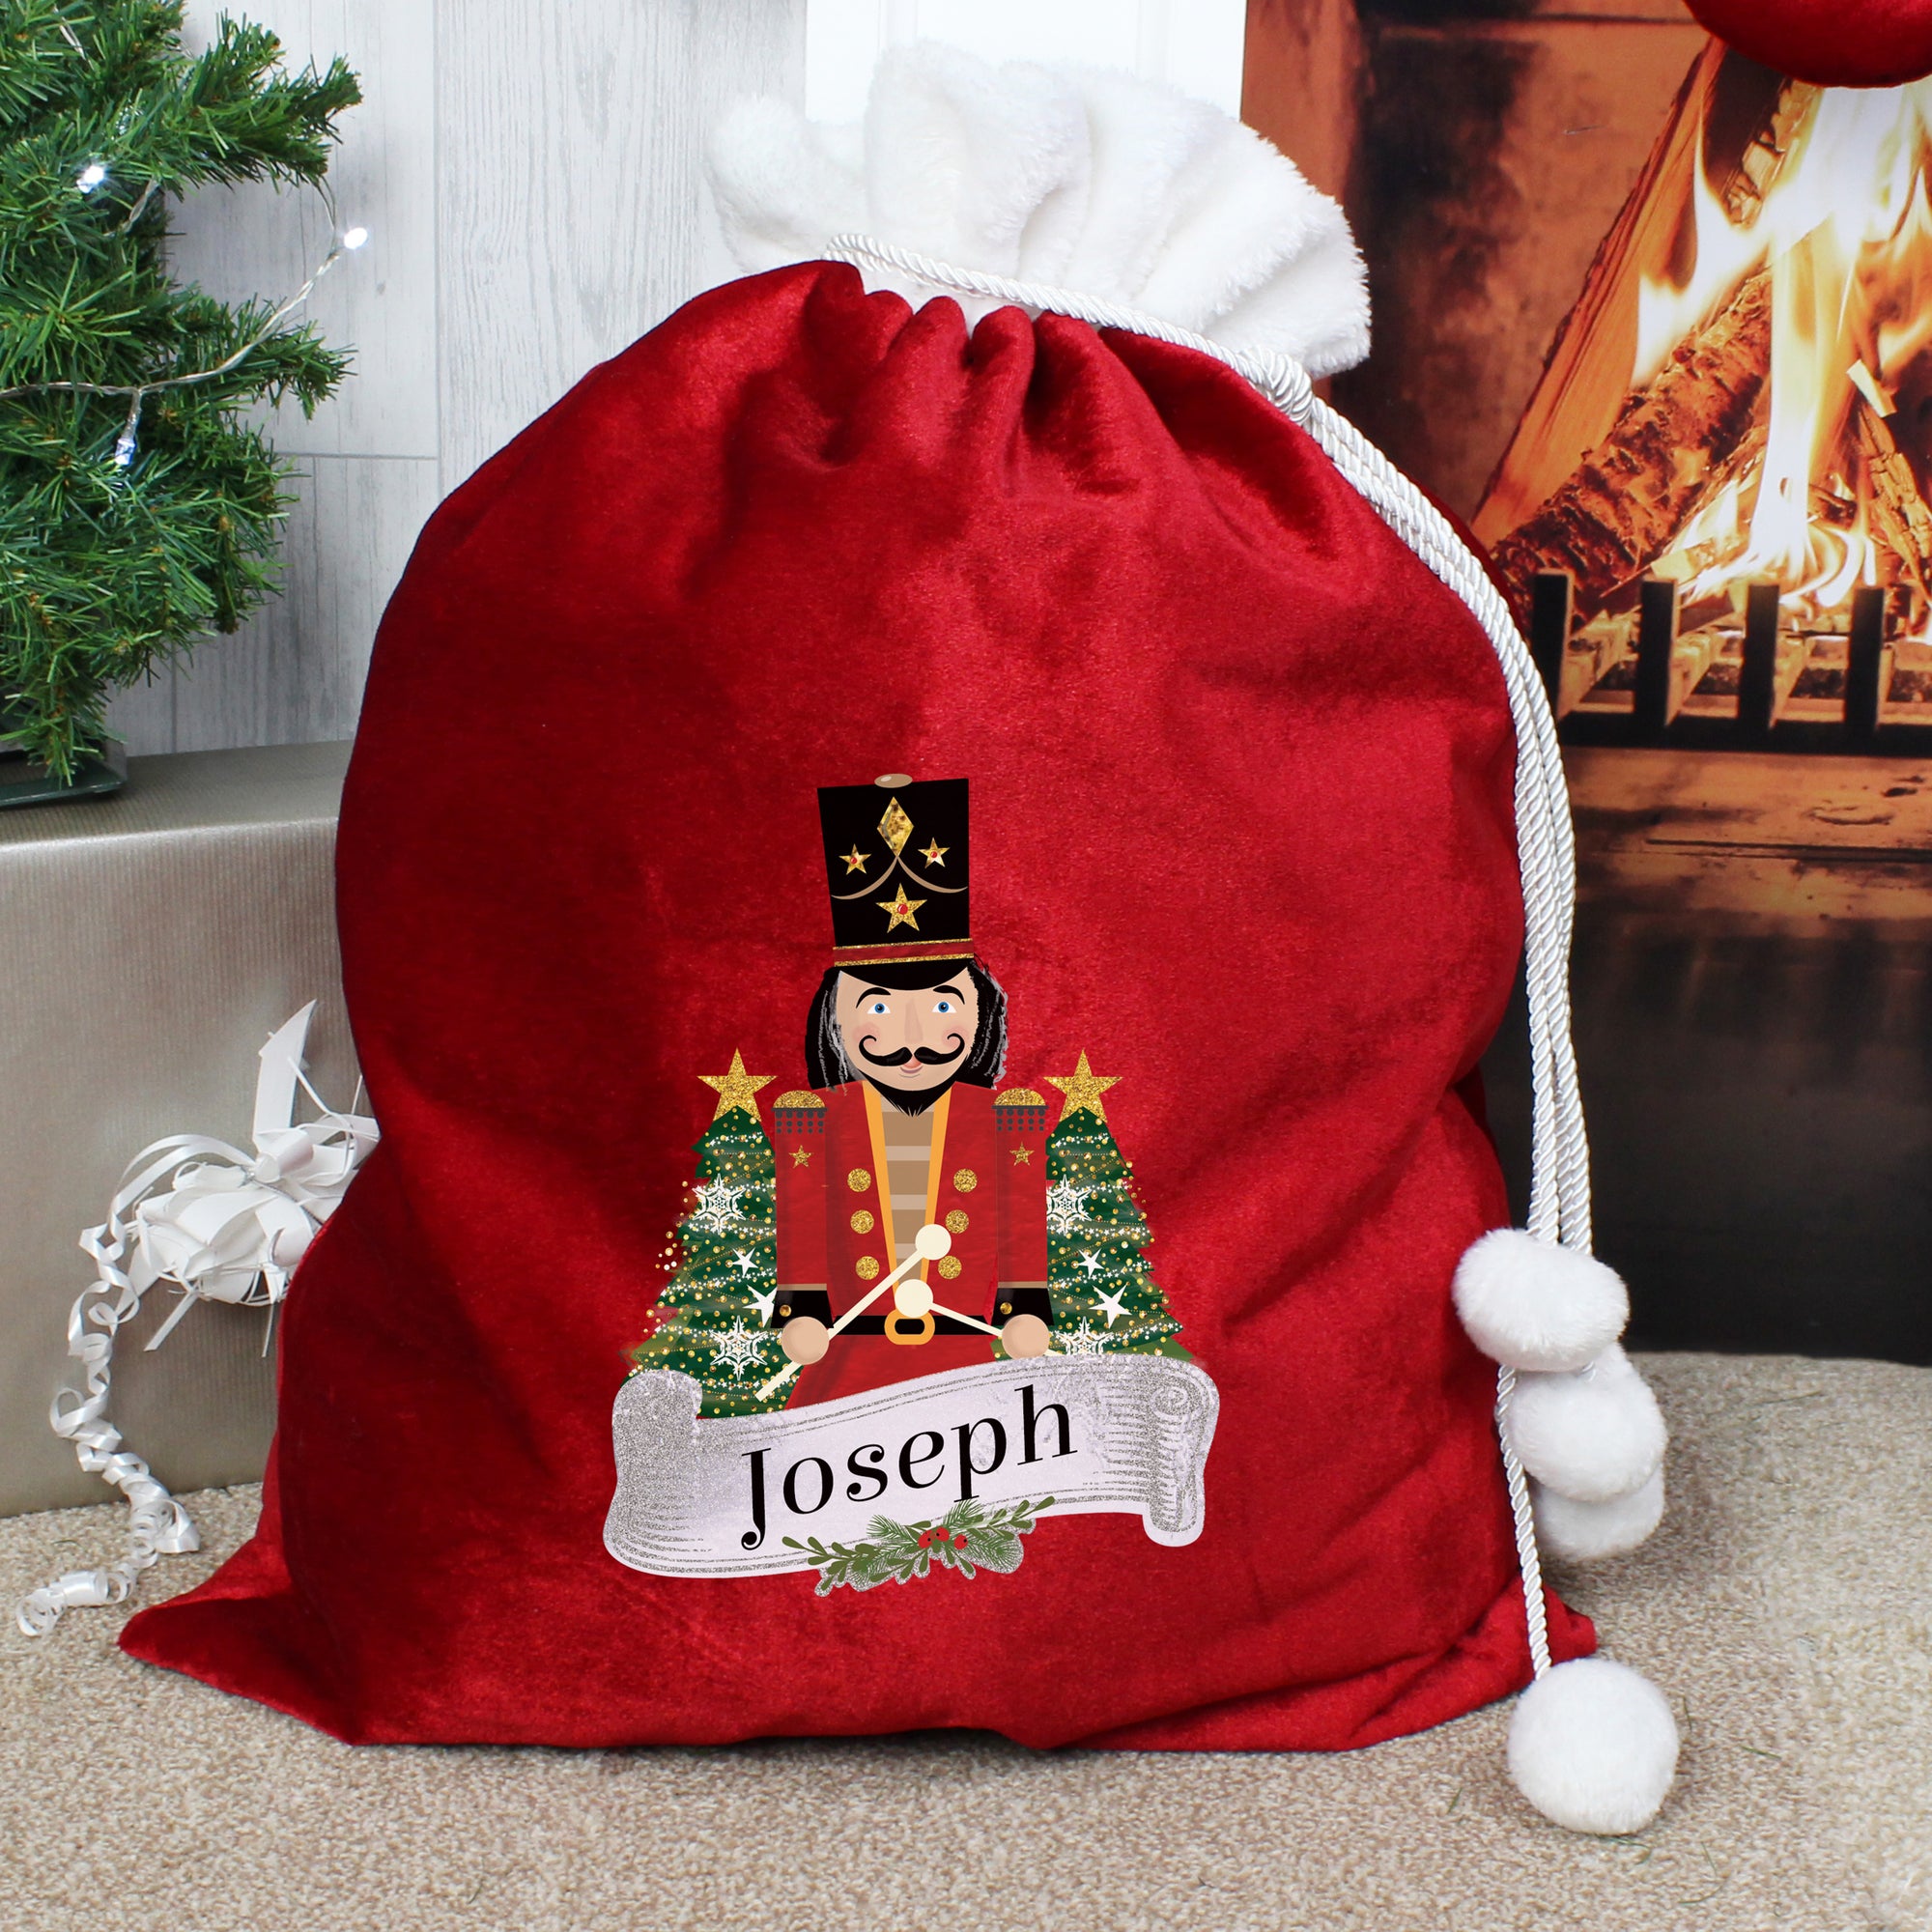 Personalised Christmas present sack made from plush red fleece fabric with a white fur collar. The bag has drawstrings to close it with white pom poms on the end and the front of the sack has an image of a wooden nutcracker toy on it and it can be personalised with a name of your choice of up to 12 characters.